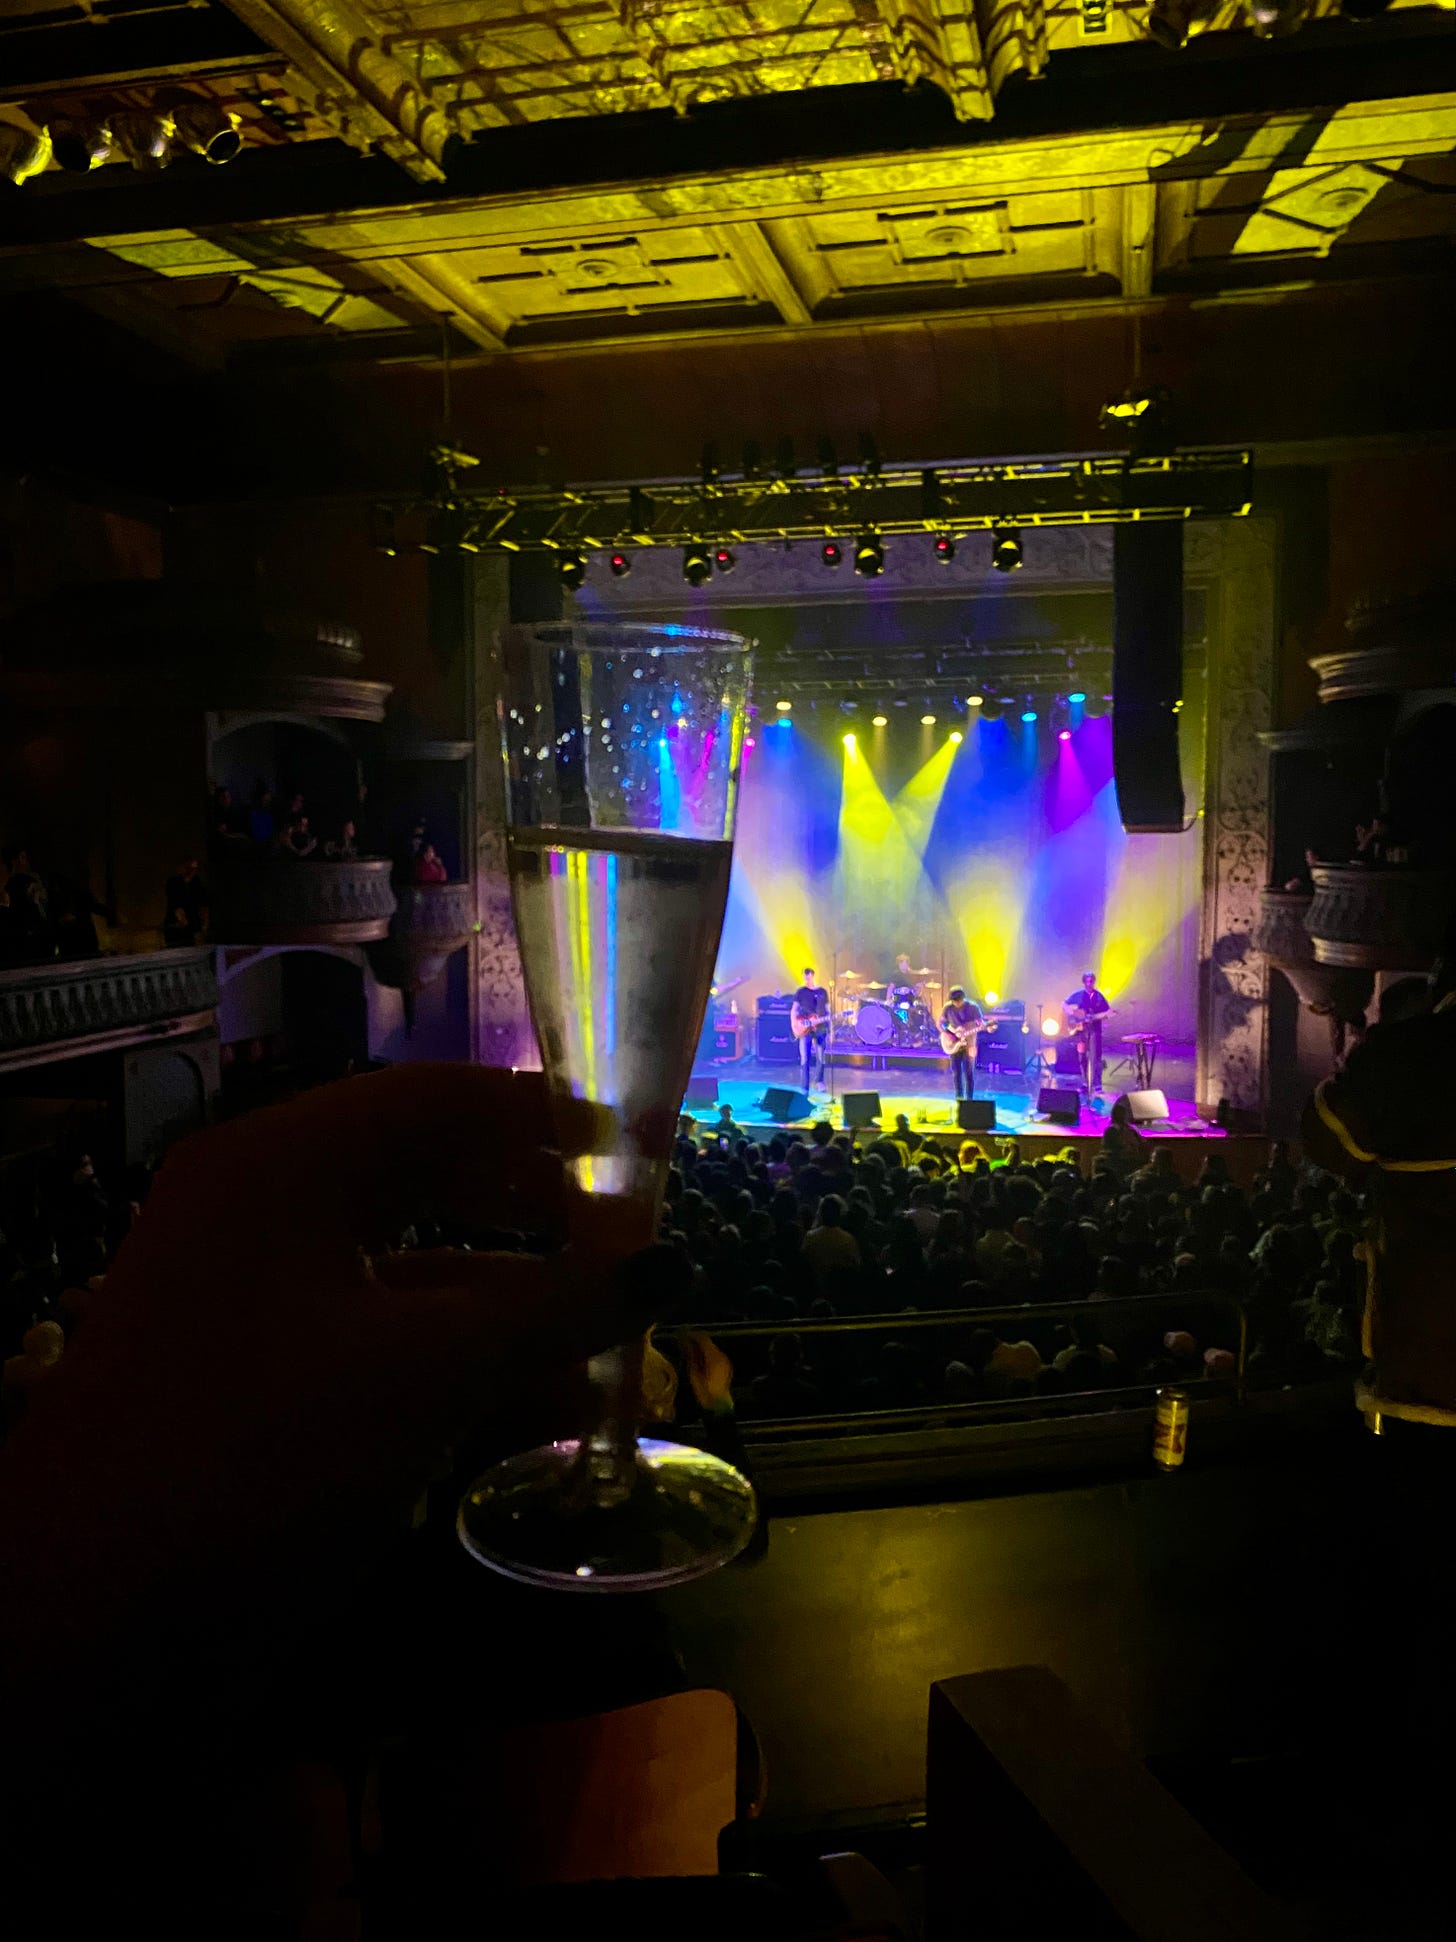 A photo of a hand holding a glass of champagne up in the air. In the background is an audience standing in front of a stage with the band Joyce Manor on it. Yellow, blue, and purple lights shine down on the stage while the rest of the theater is dark.